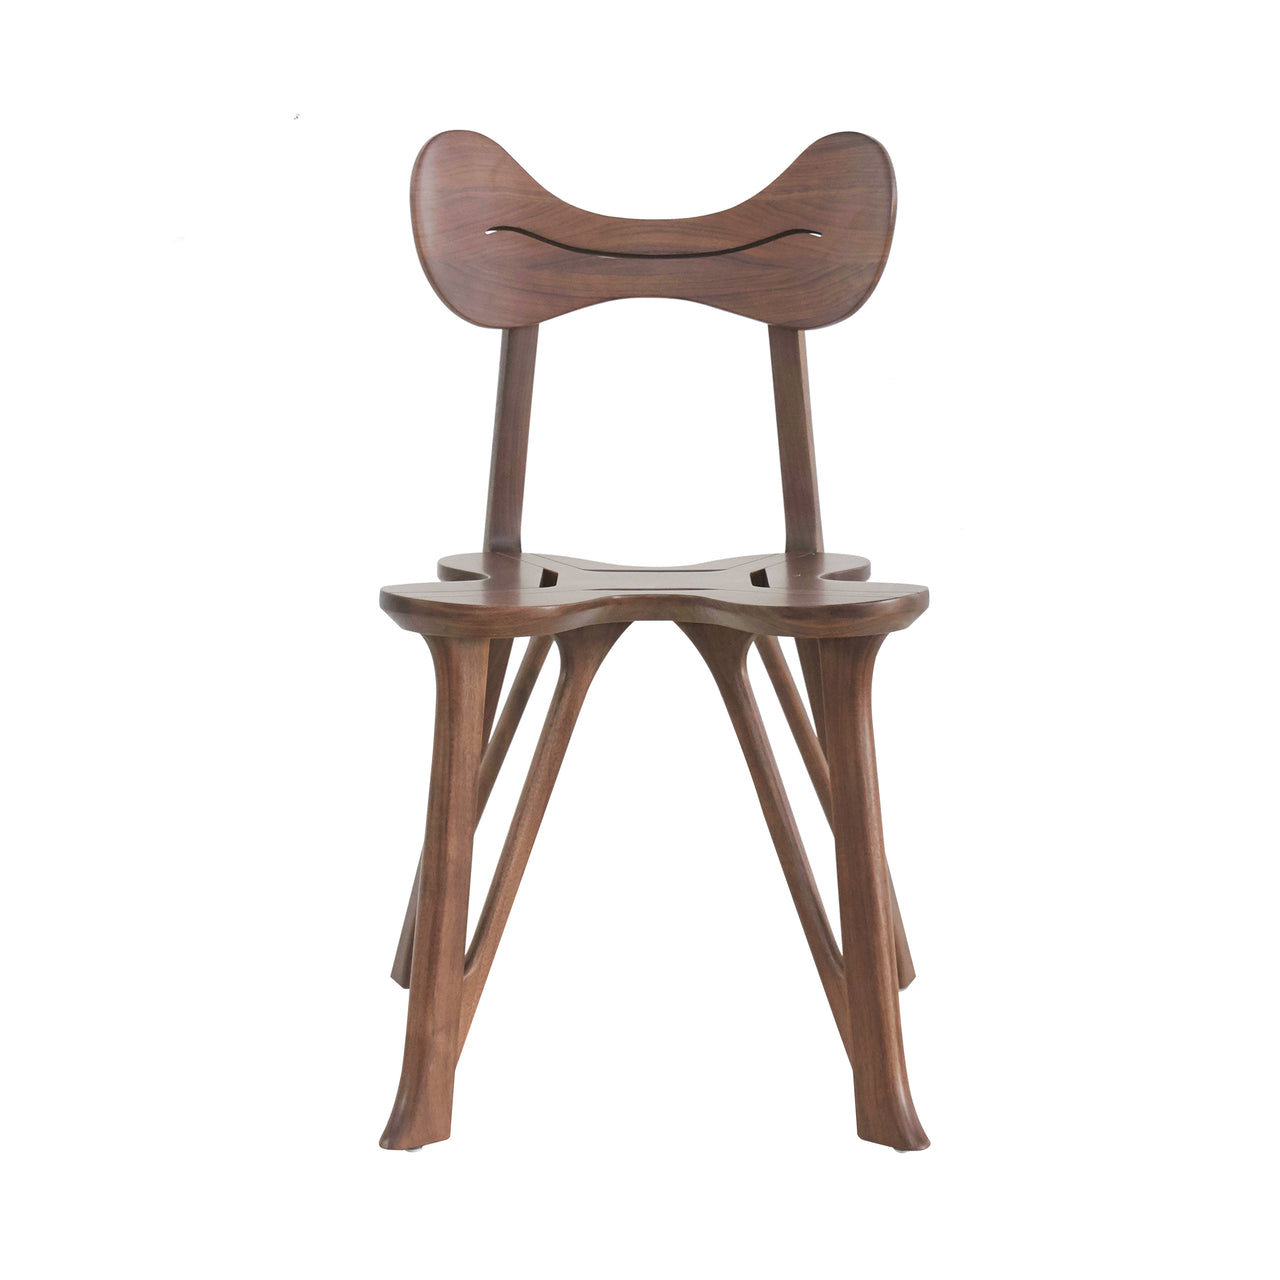 Stay Dining Chair: Natural Walnut